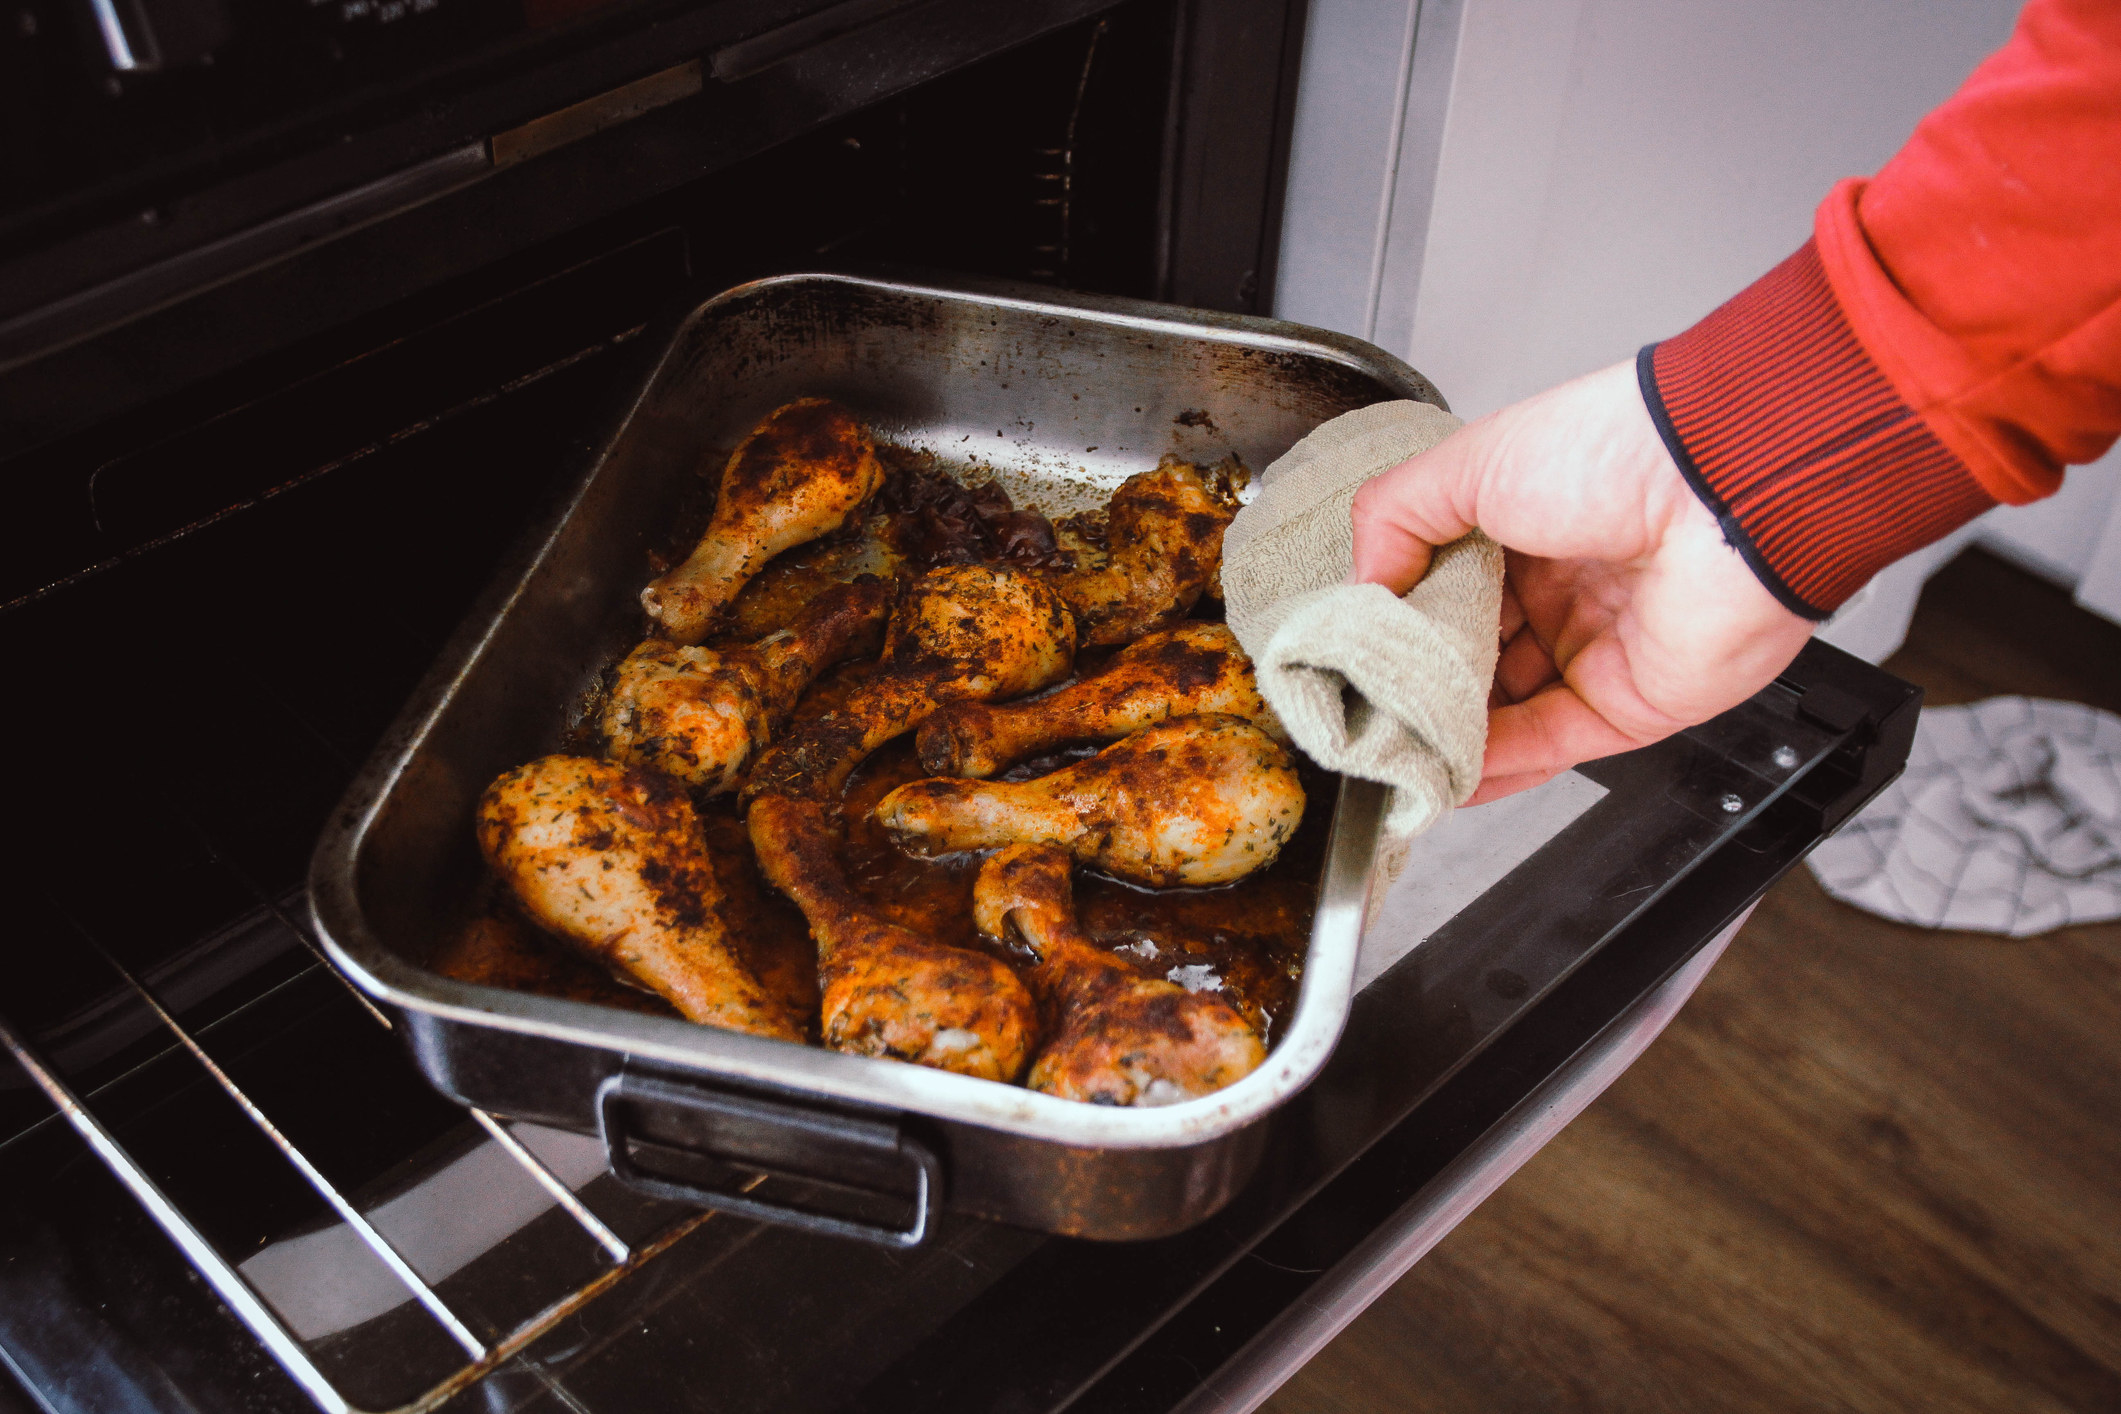 Hands getting a roasting tray of chicken out of the oven